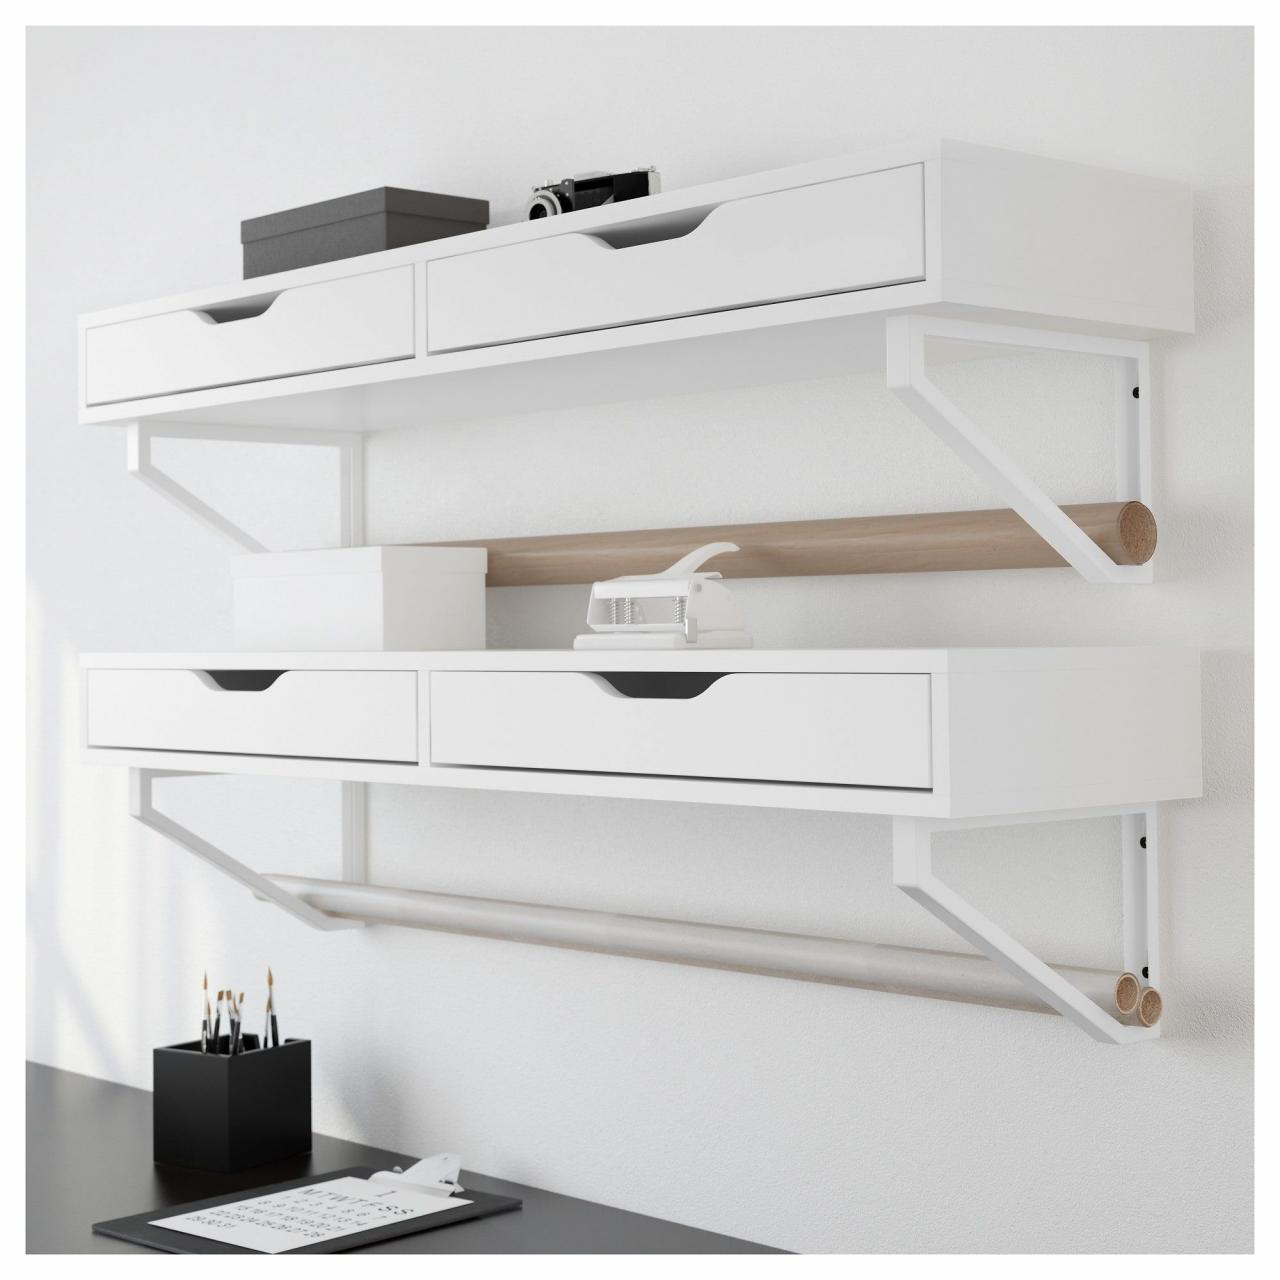 Ikea wall shelves with drawers and brackets that can hold wrapping